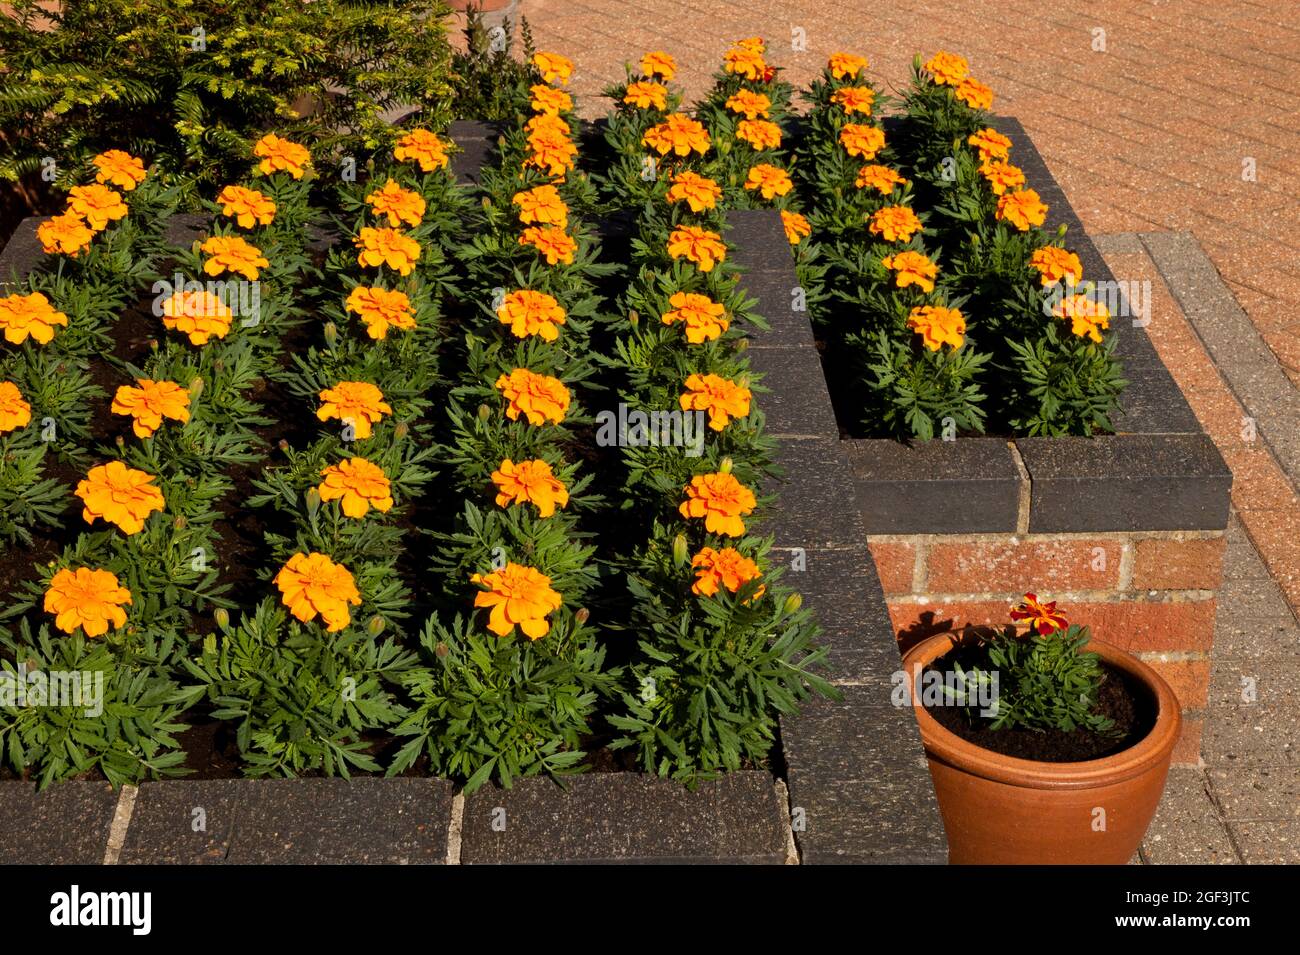 Raised Flower Bed on a Patio and a pot Stock Photo